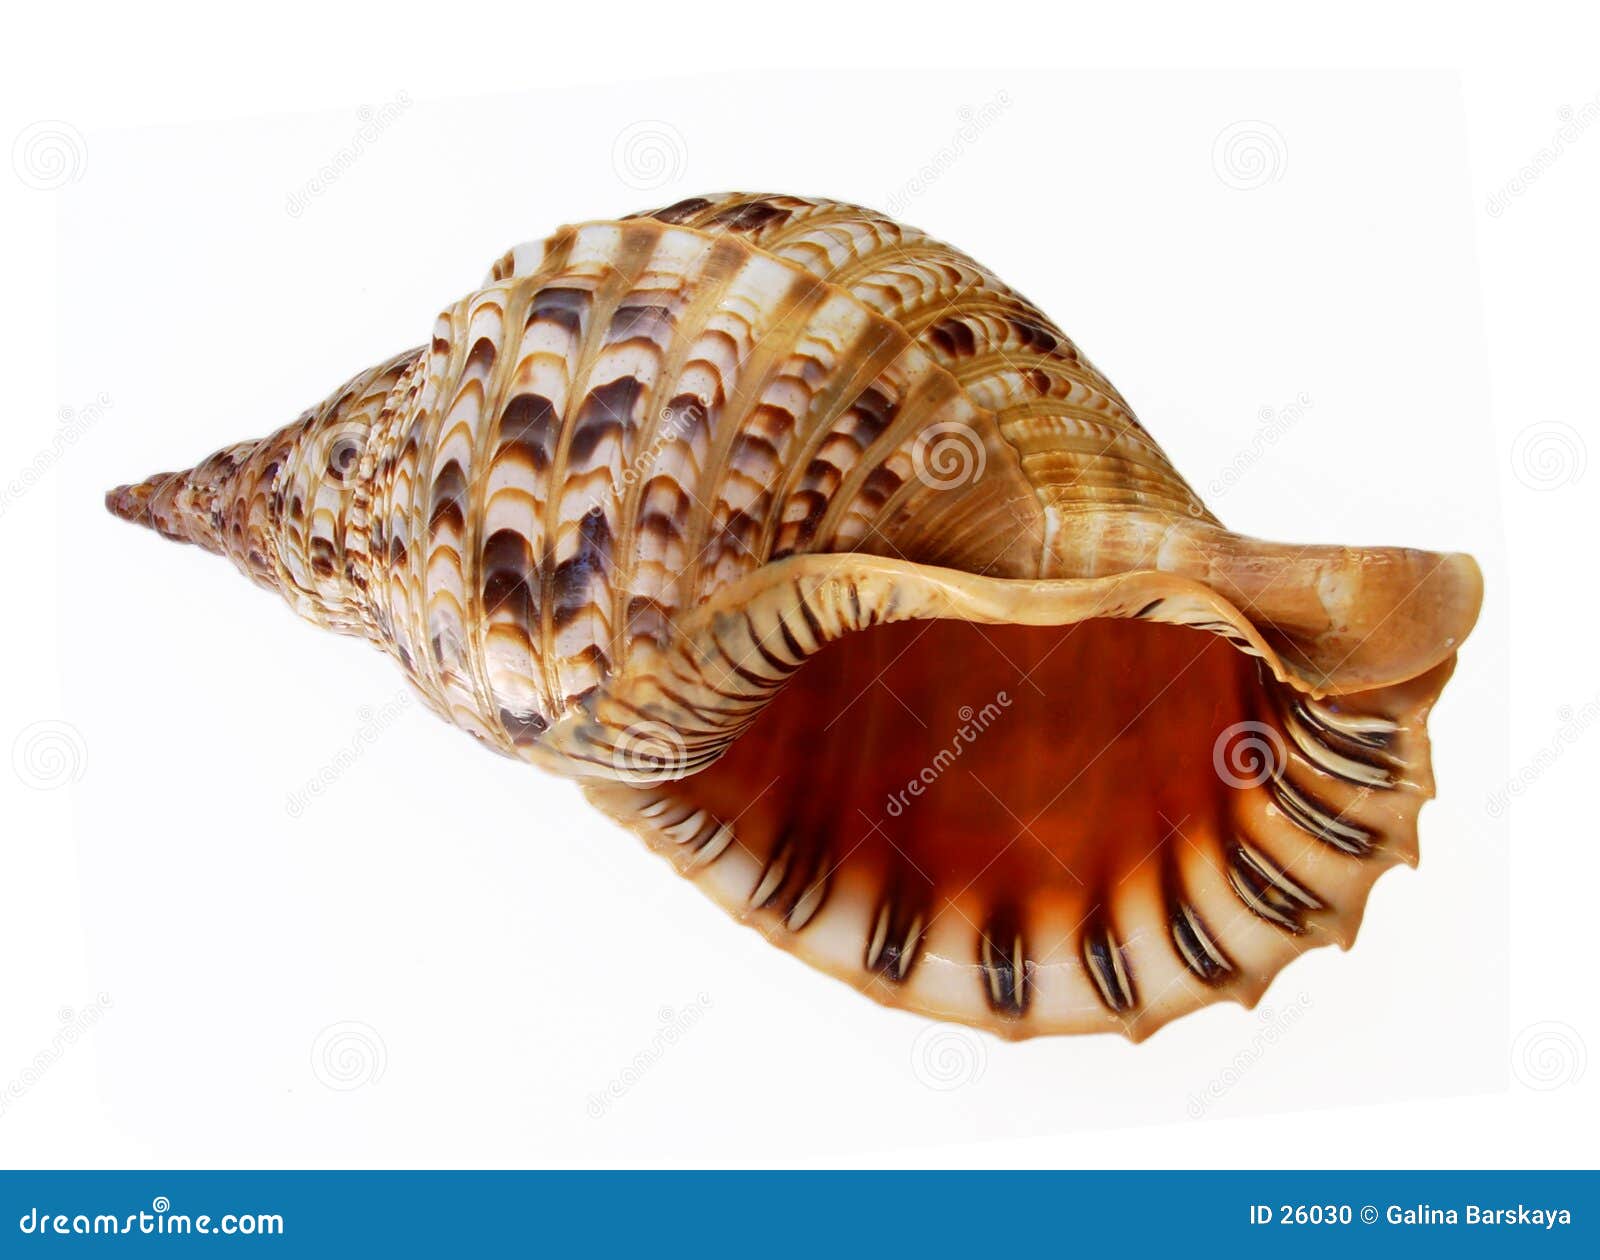 The seashell should look like this.